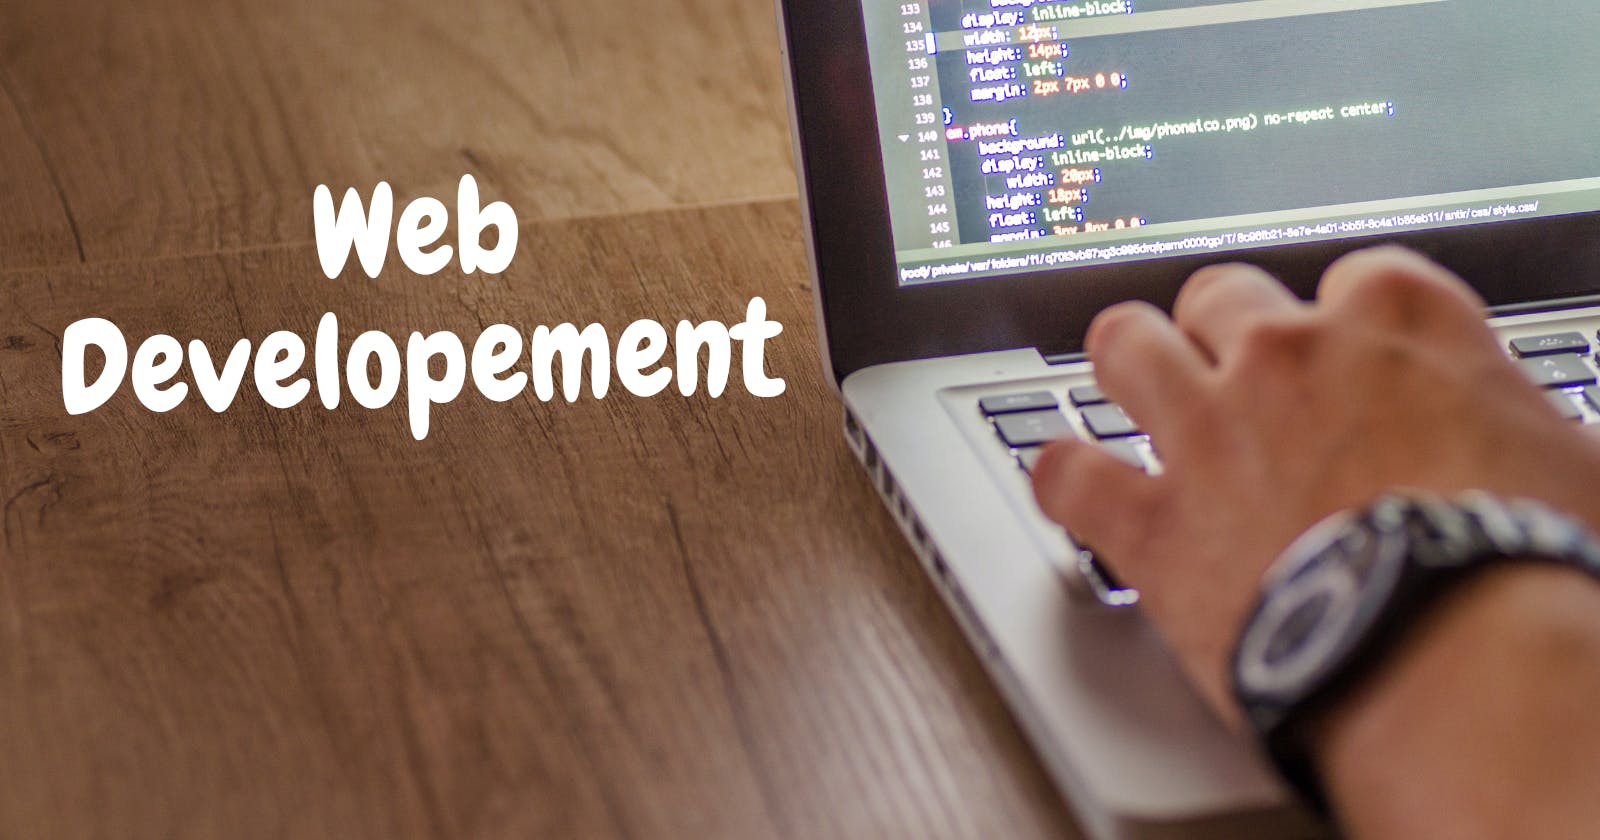 How To Get Started With Web Development